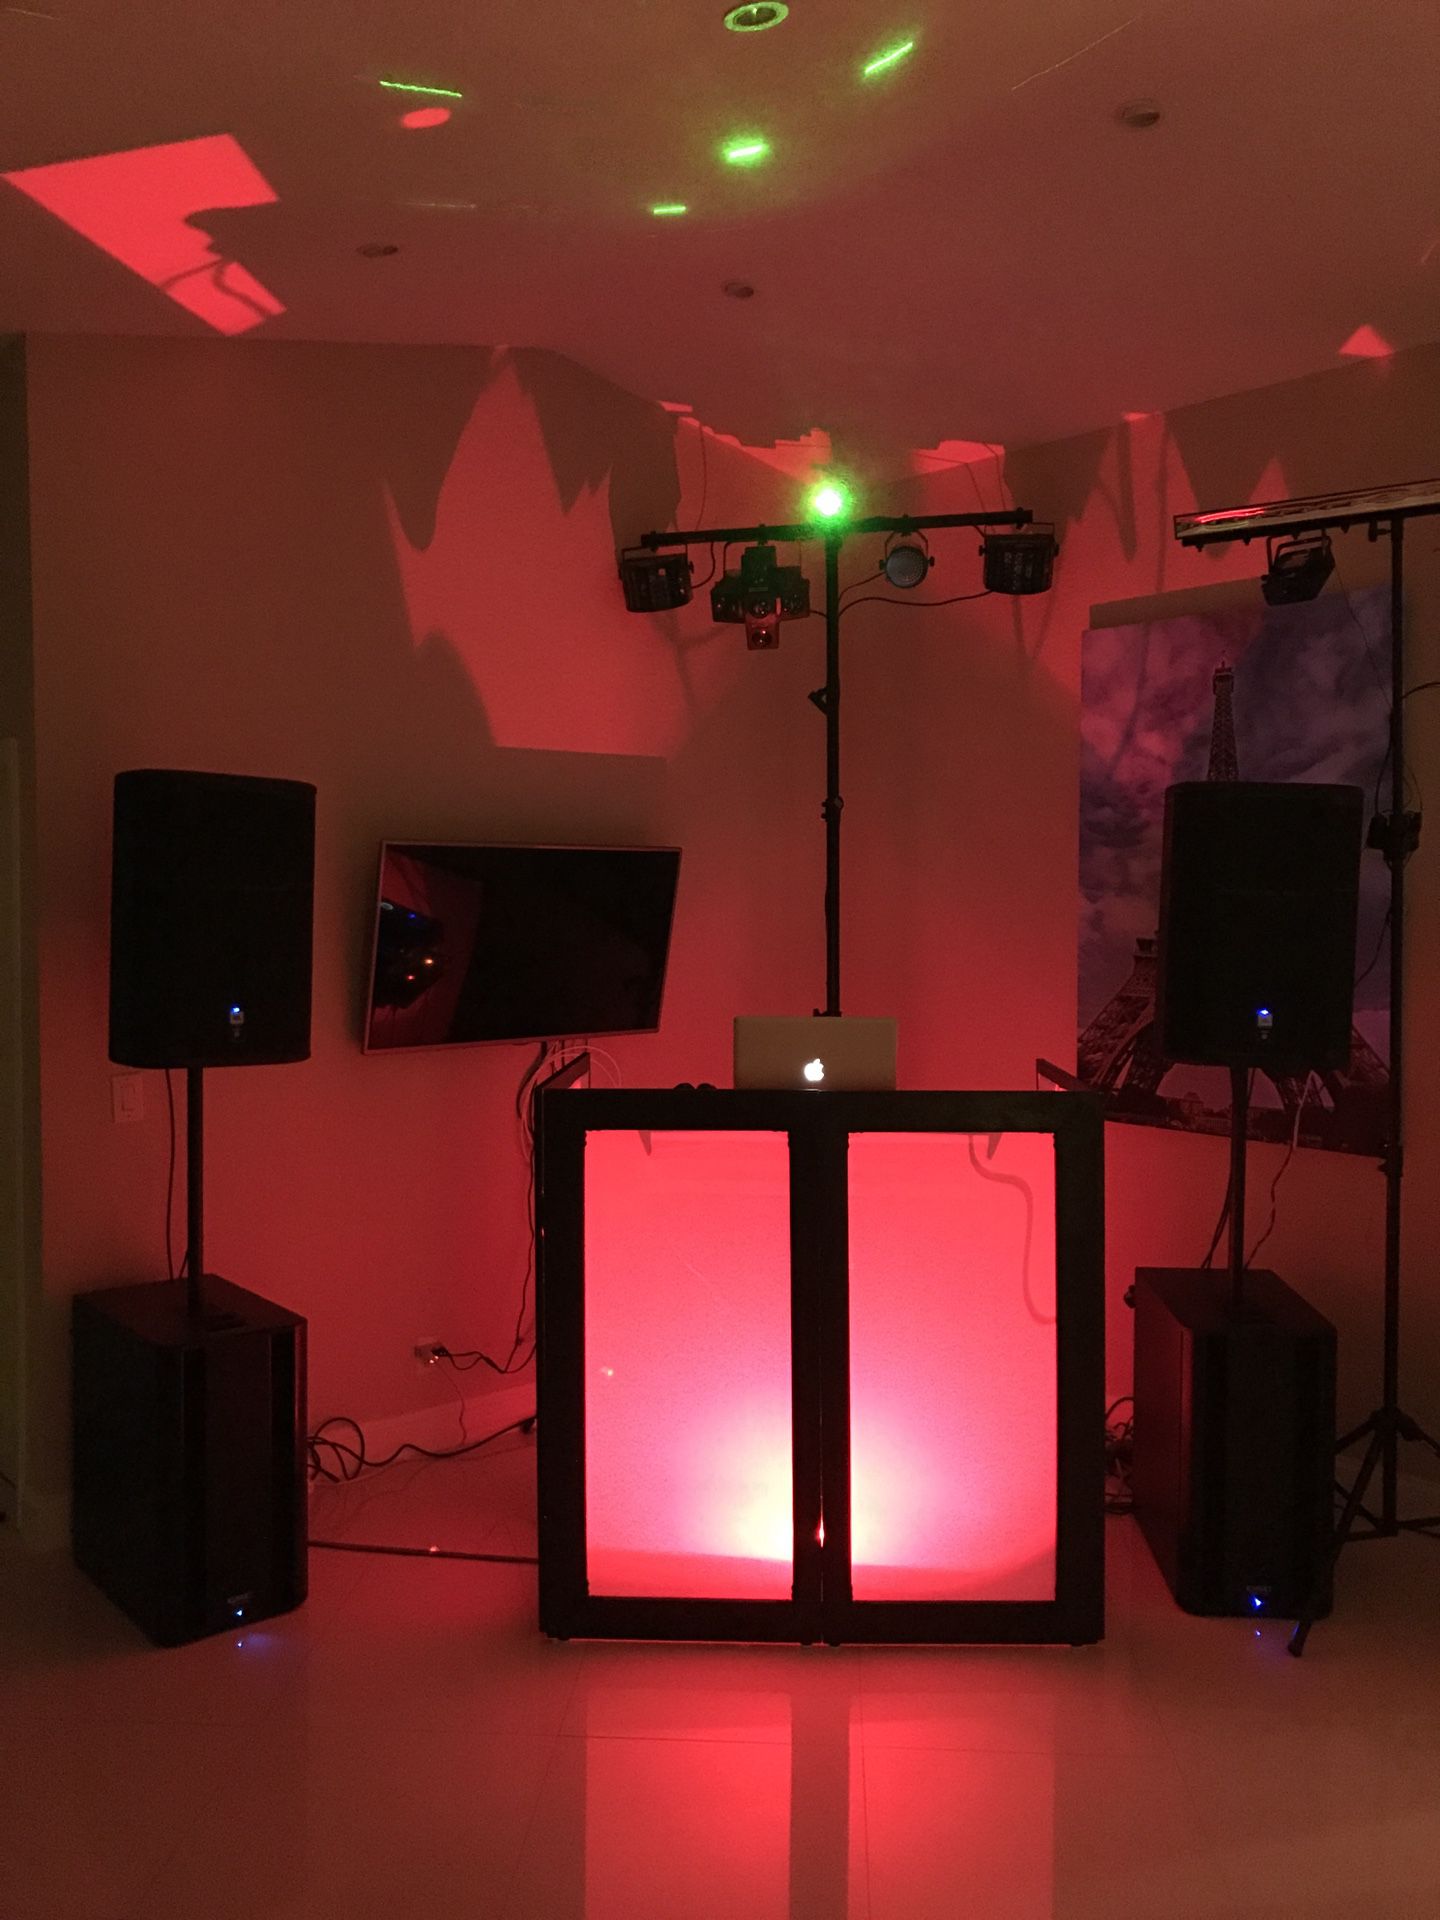 JBL Speakers + subwoof + lights/laser (everything included) (mixer not included)